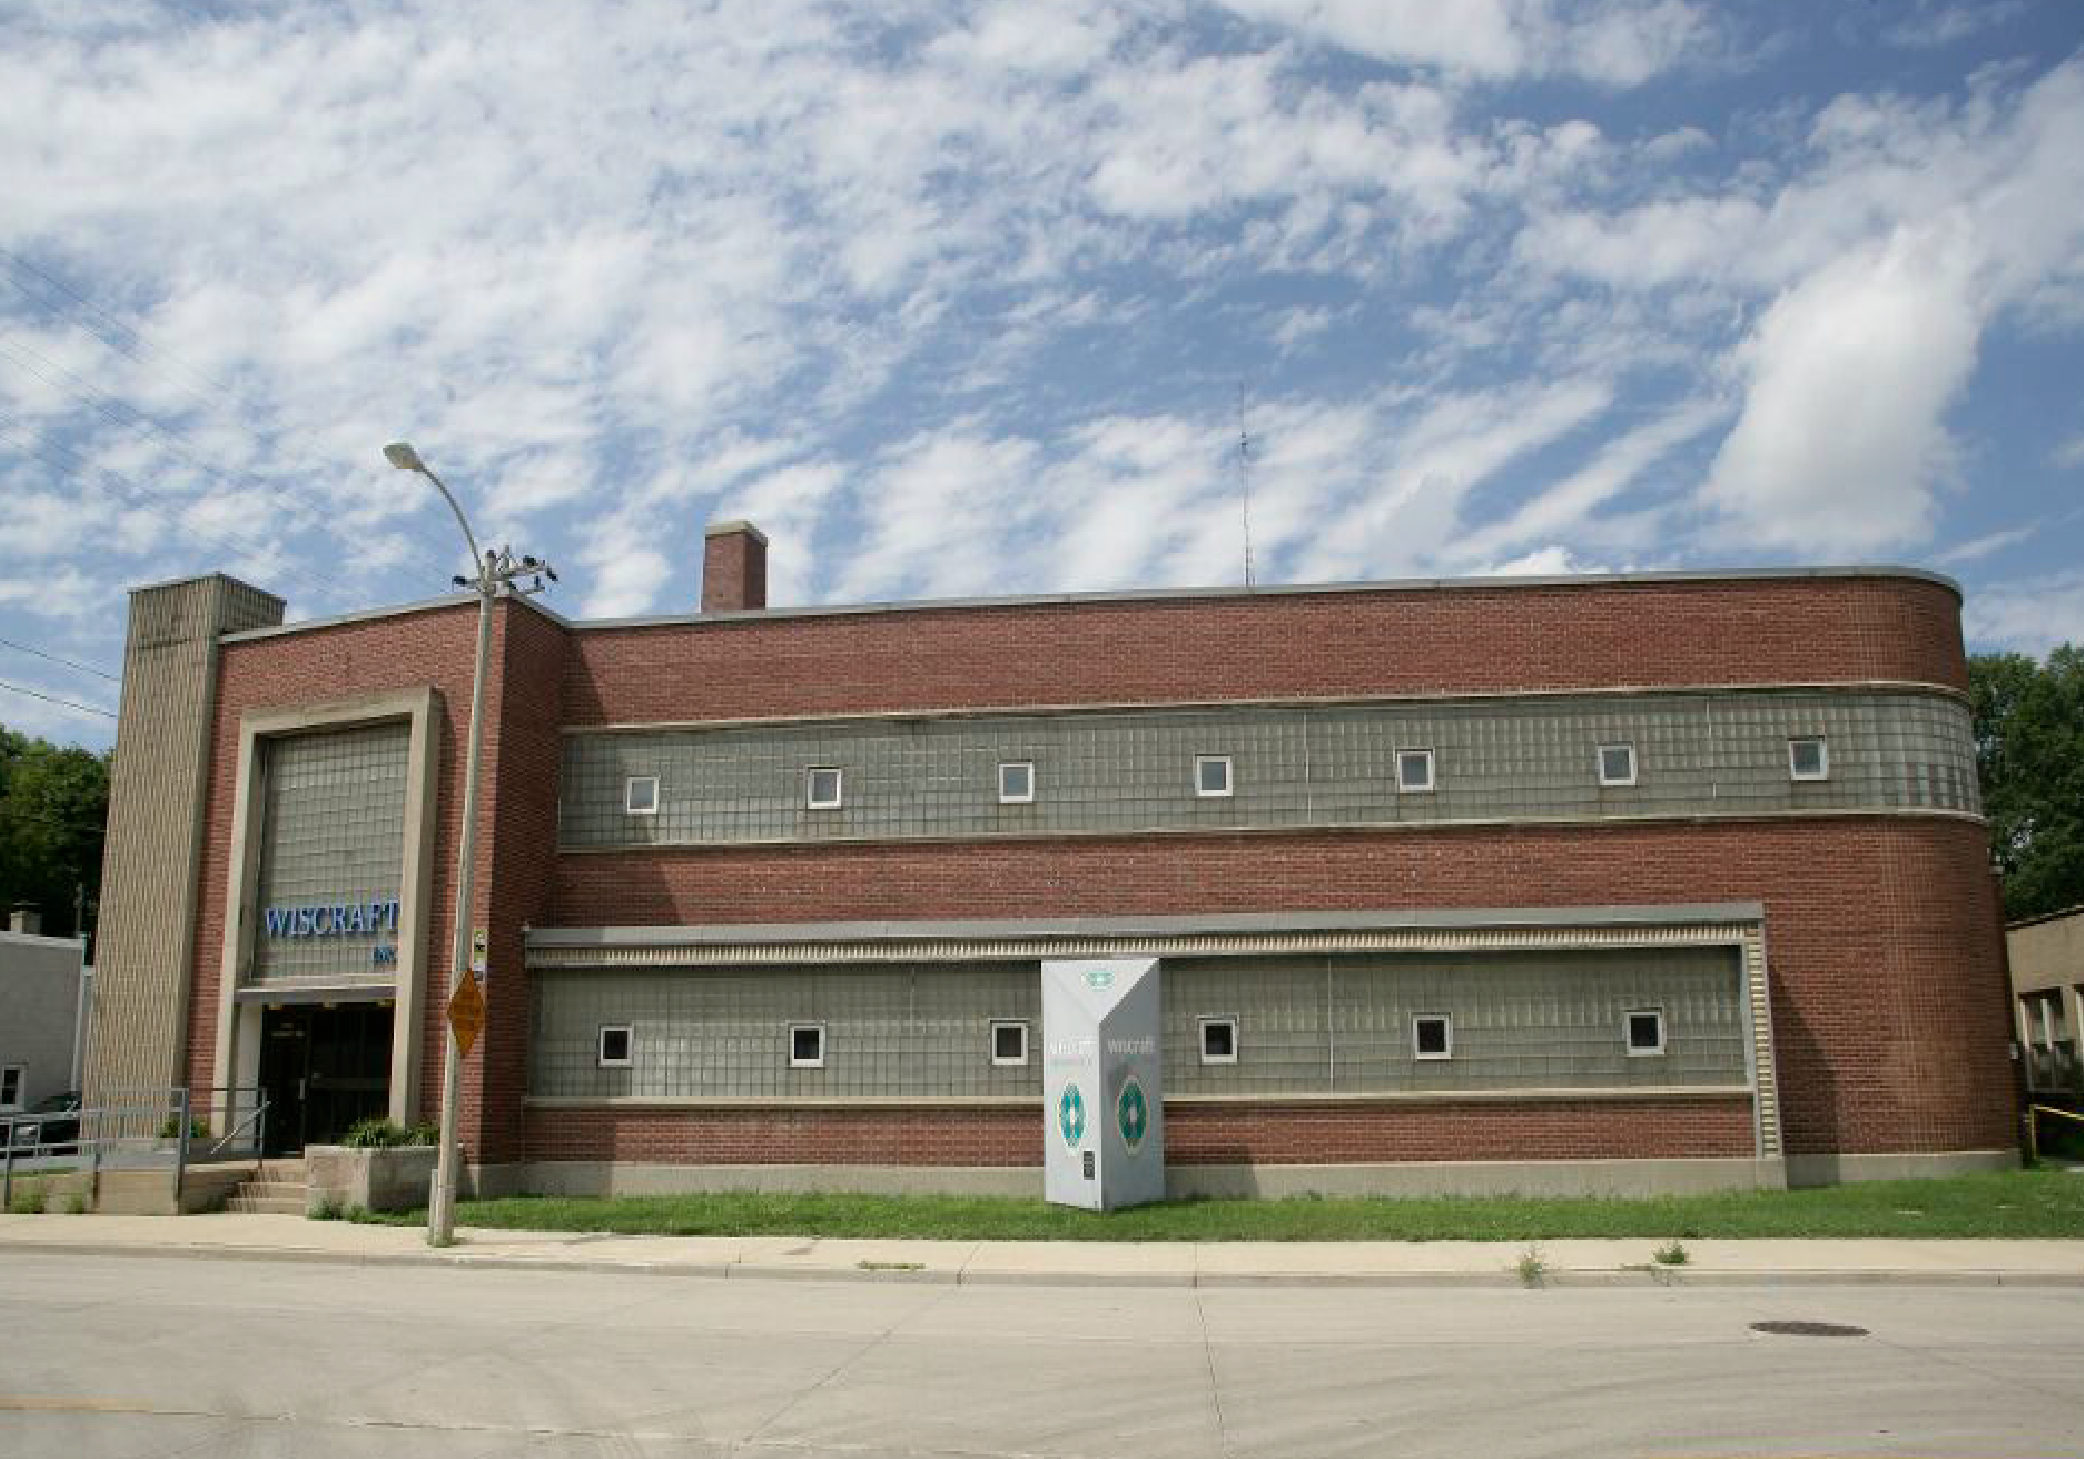 Exterior of the wiscraft building.